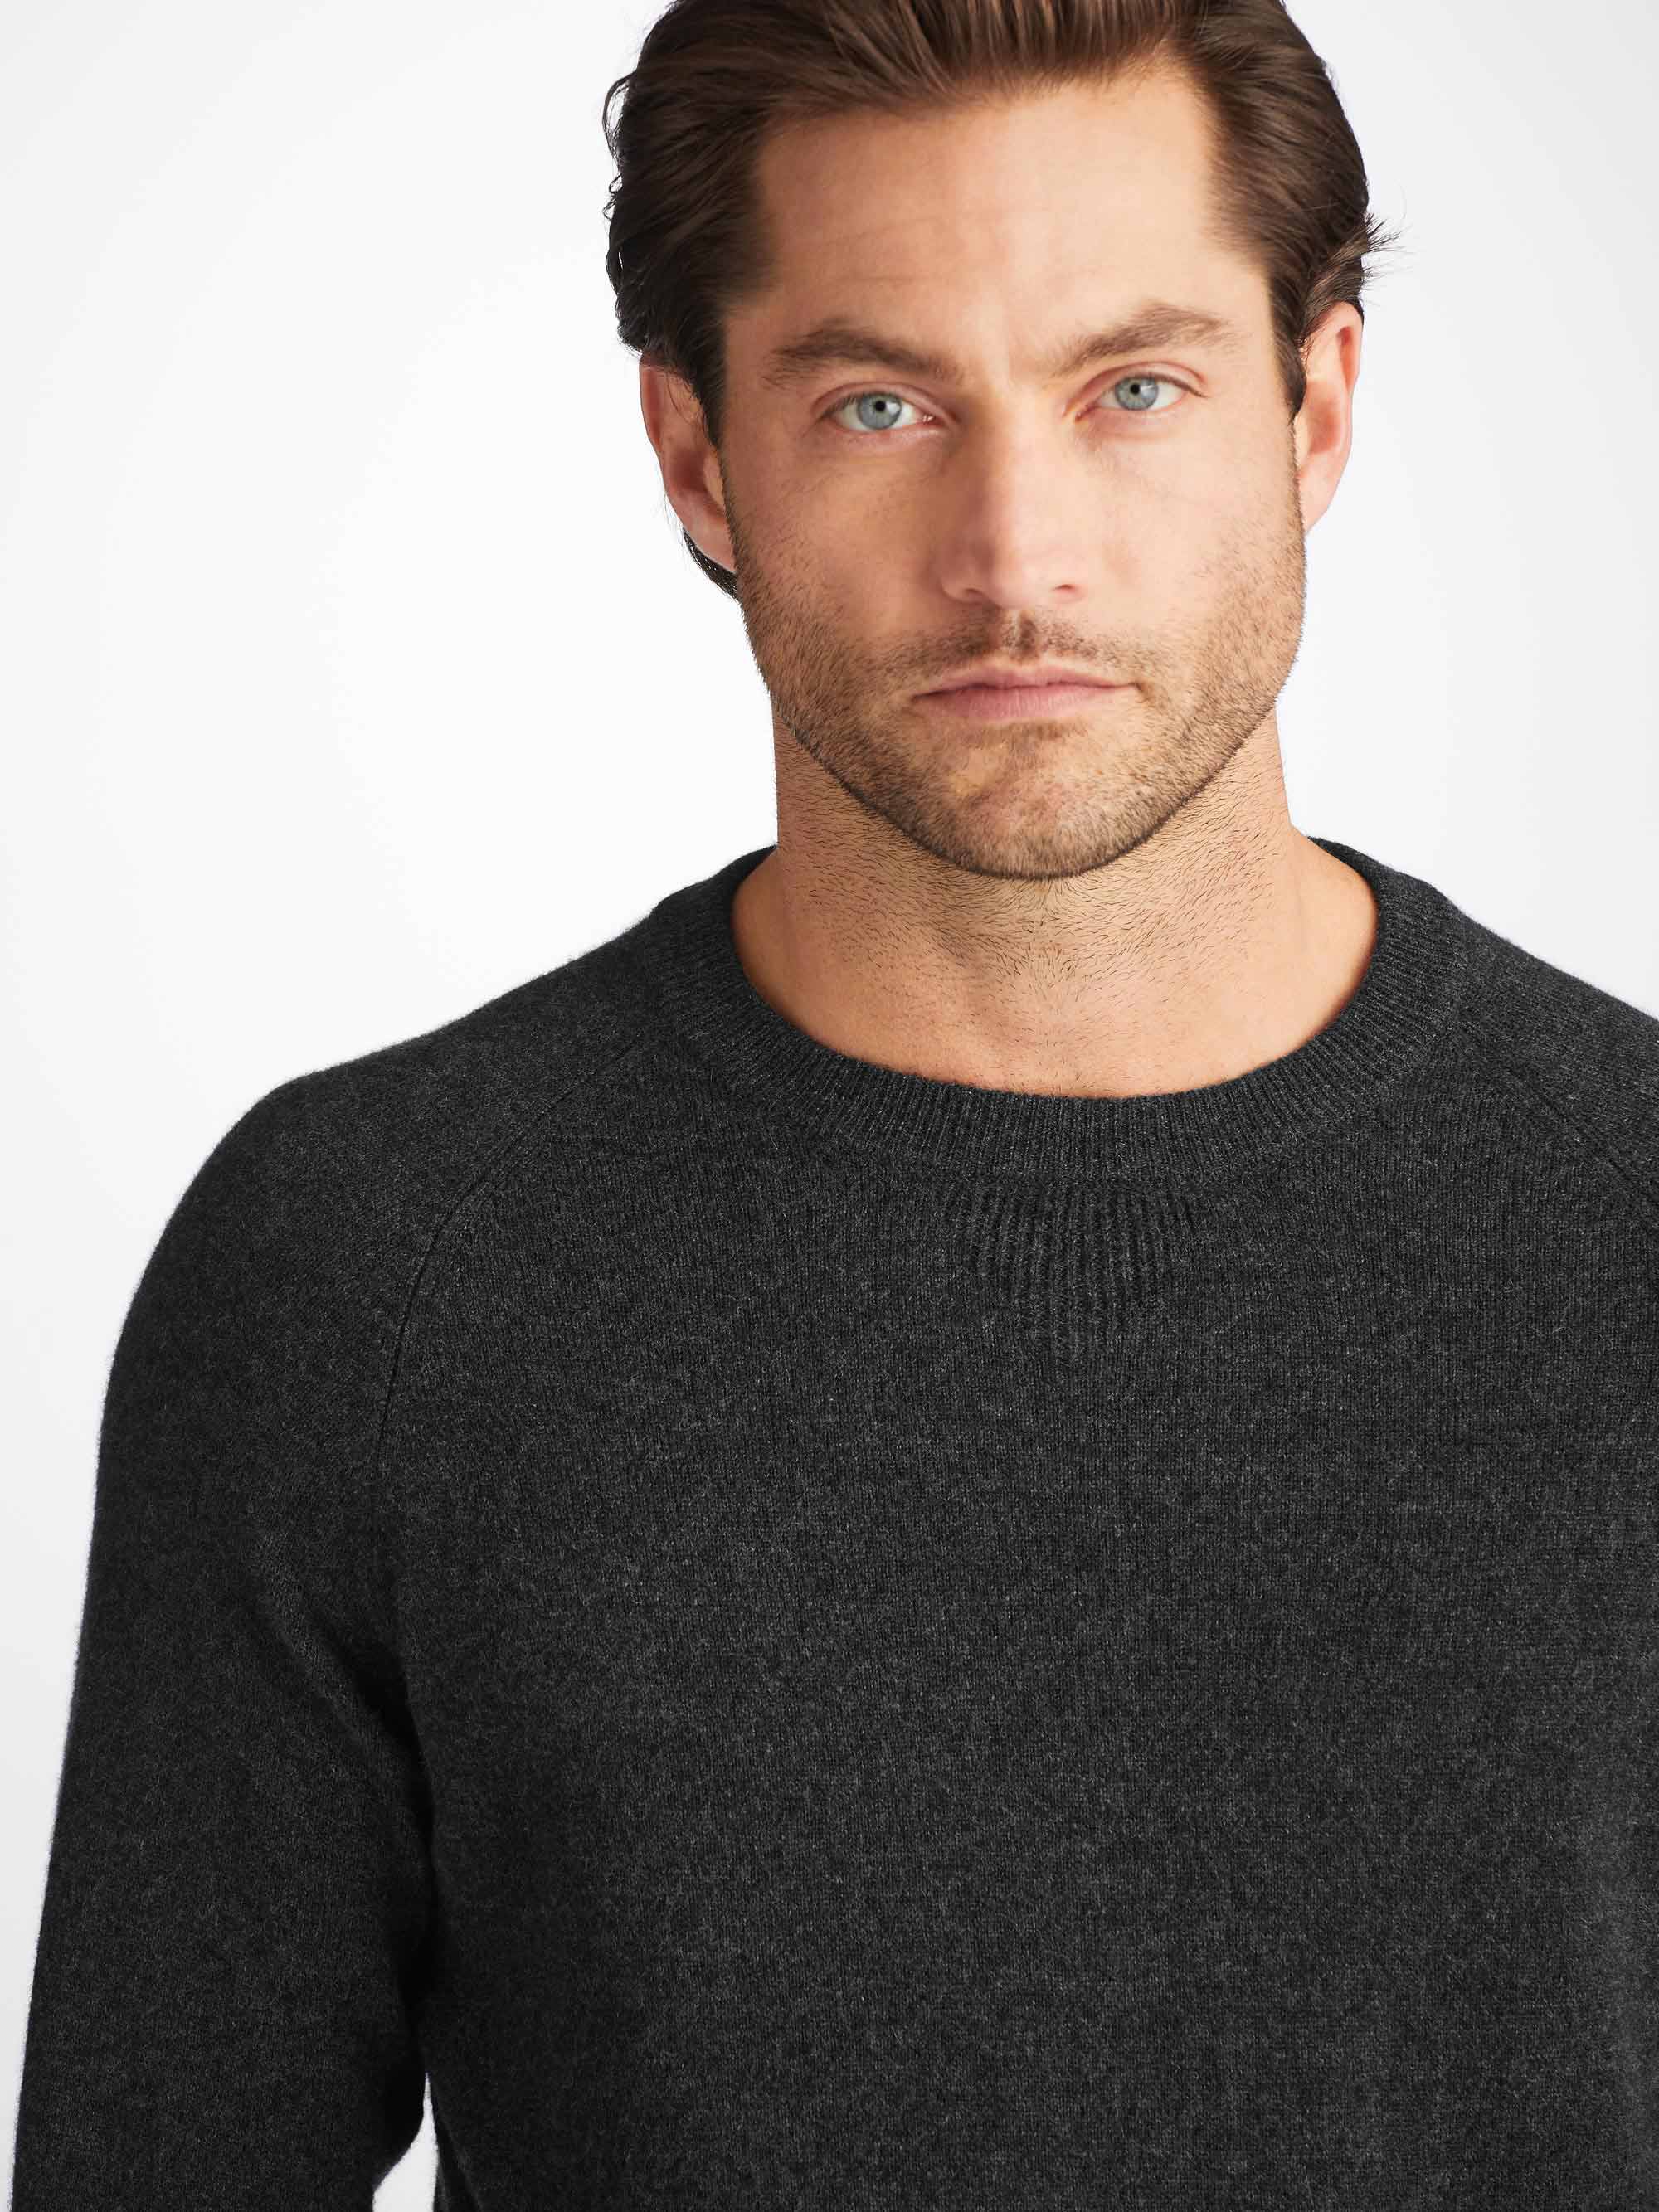 Men's Sweater Finley Cashmere Charcoal